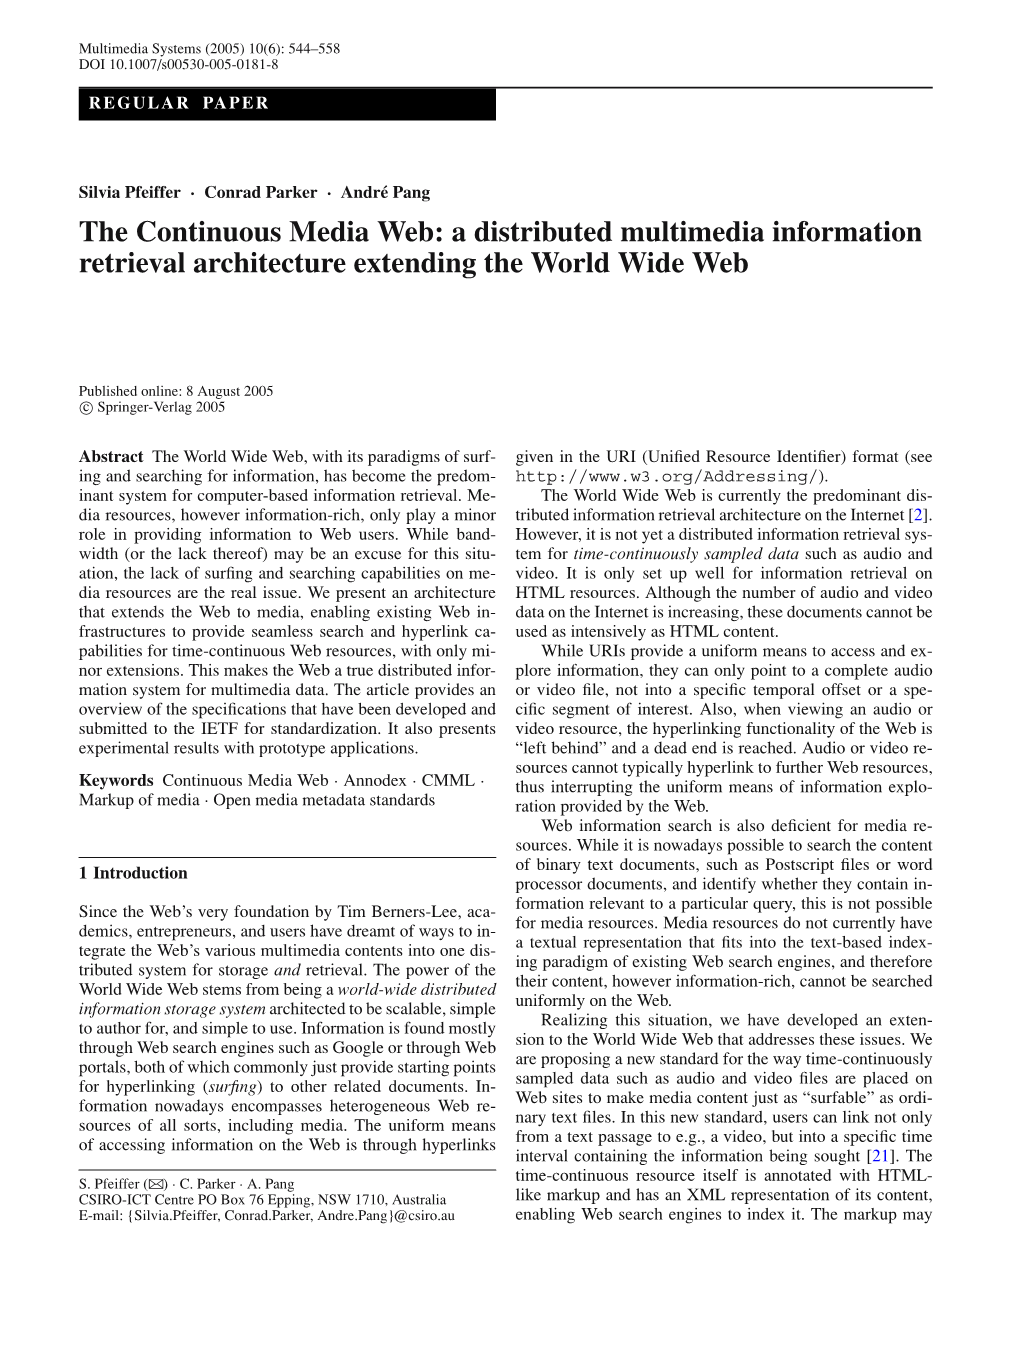 The Continuous Media Web: a Distributed Multimedia Information Retrieval Architecture Extending the World Wide Web